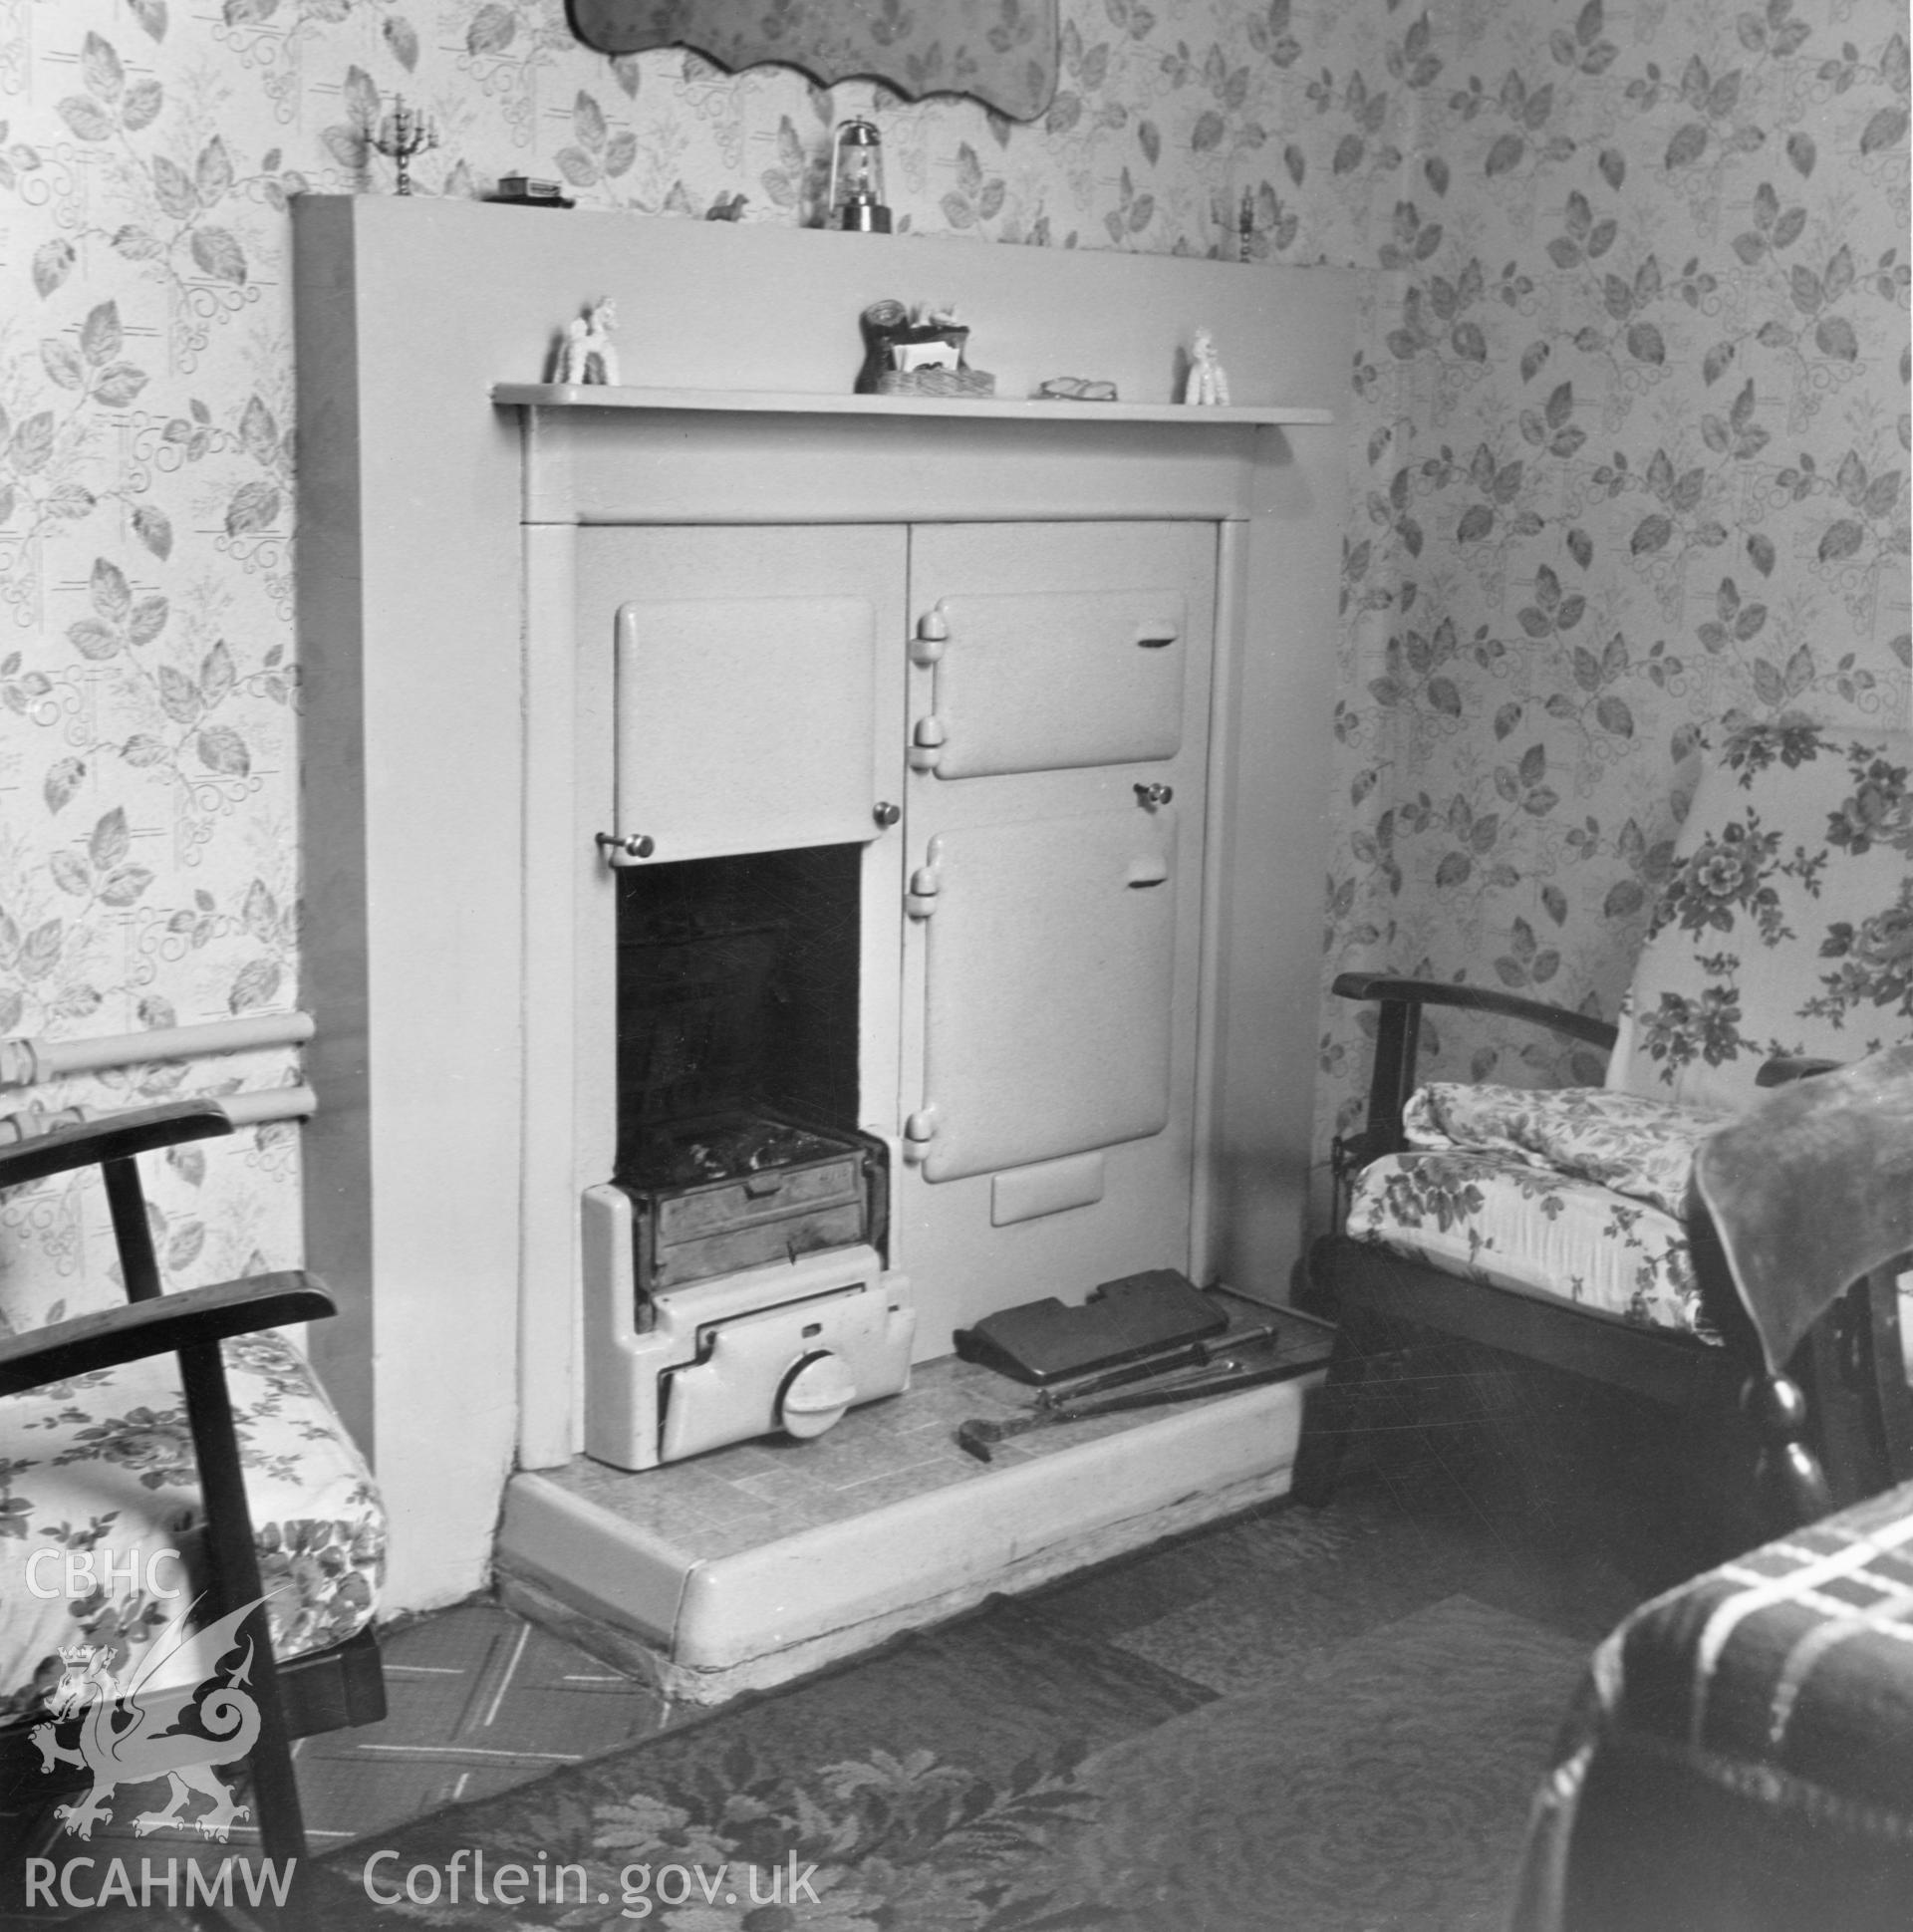 1 b/w print showing interior of a house on Council Street, Ebbw Vale (showing solid fuel cooker with back boiler), used as an illustration of the Housing Improvement Grant scheme for exhibitions held at Ministry of Housing stands at agricultural shows (1960); collated by the former Central Office of Information.